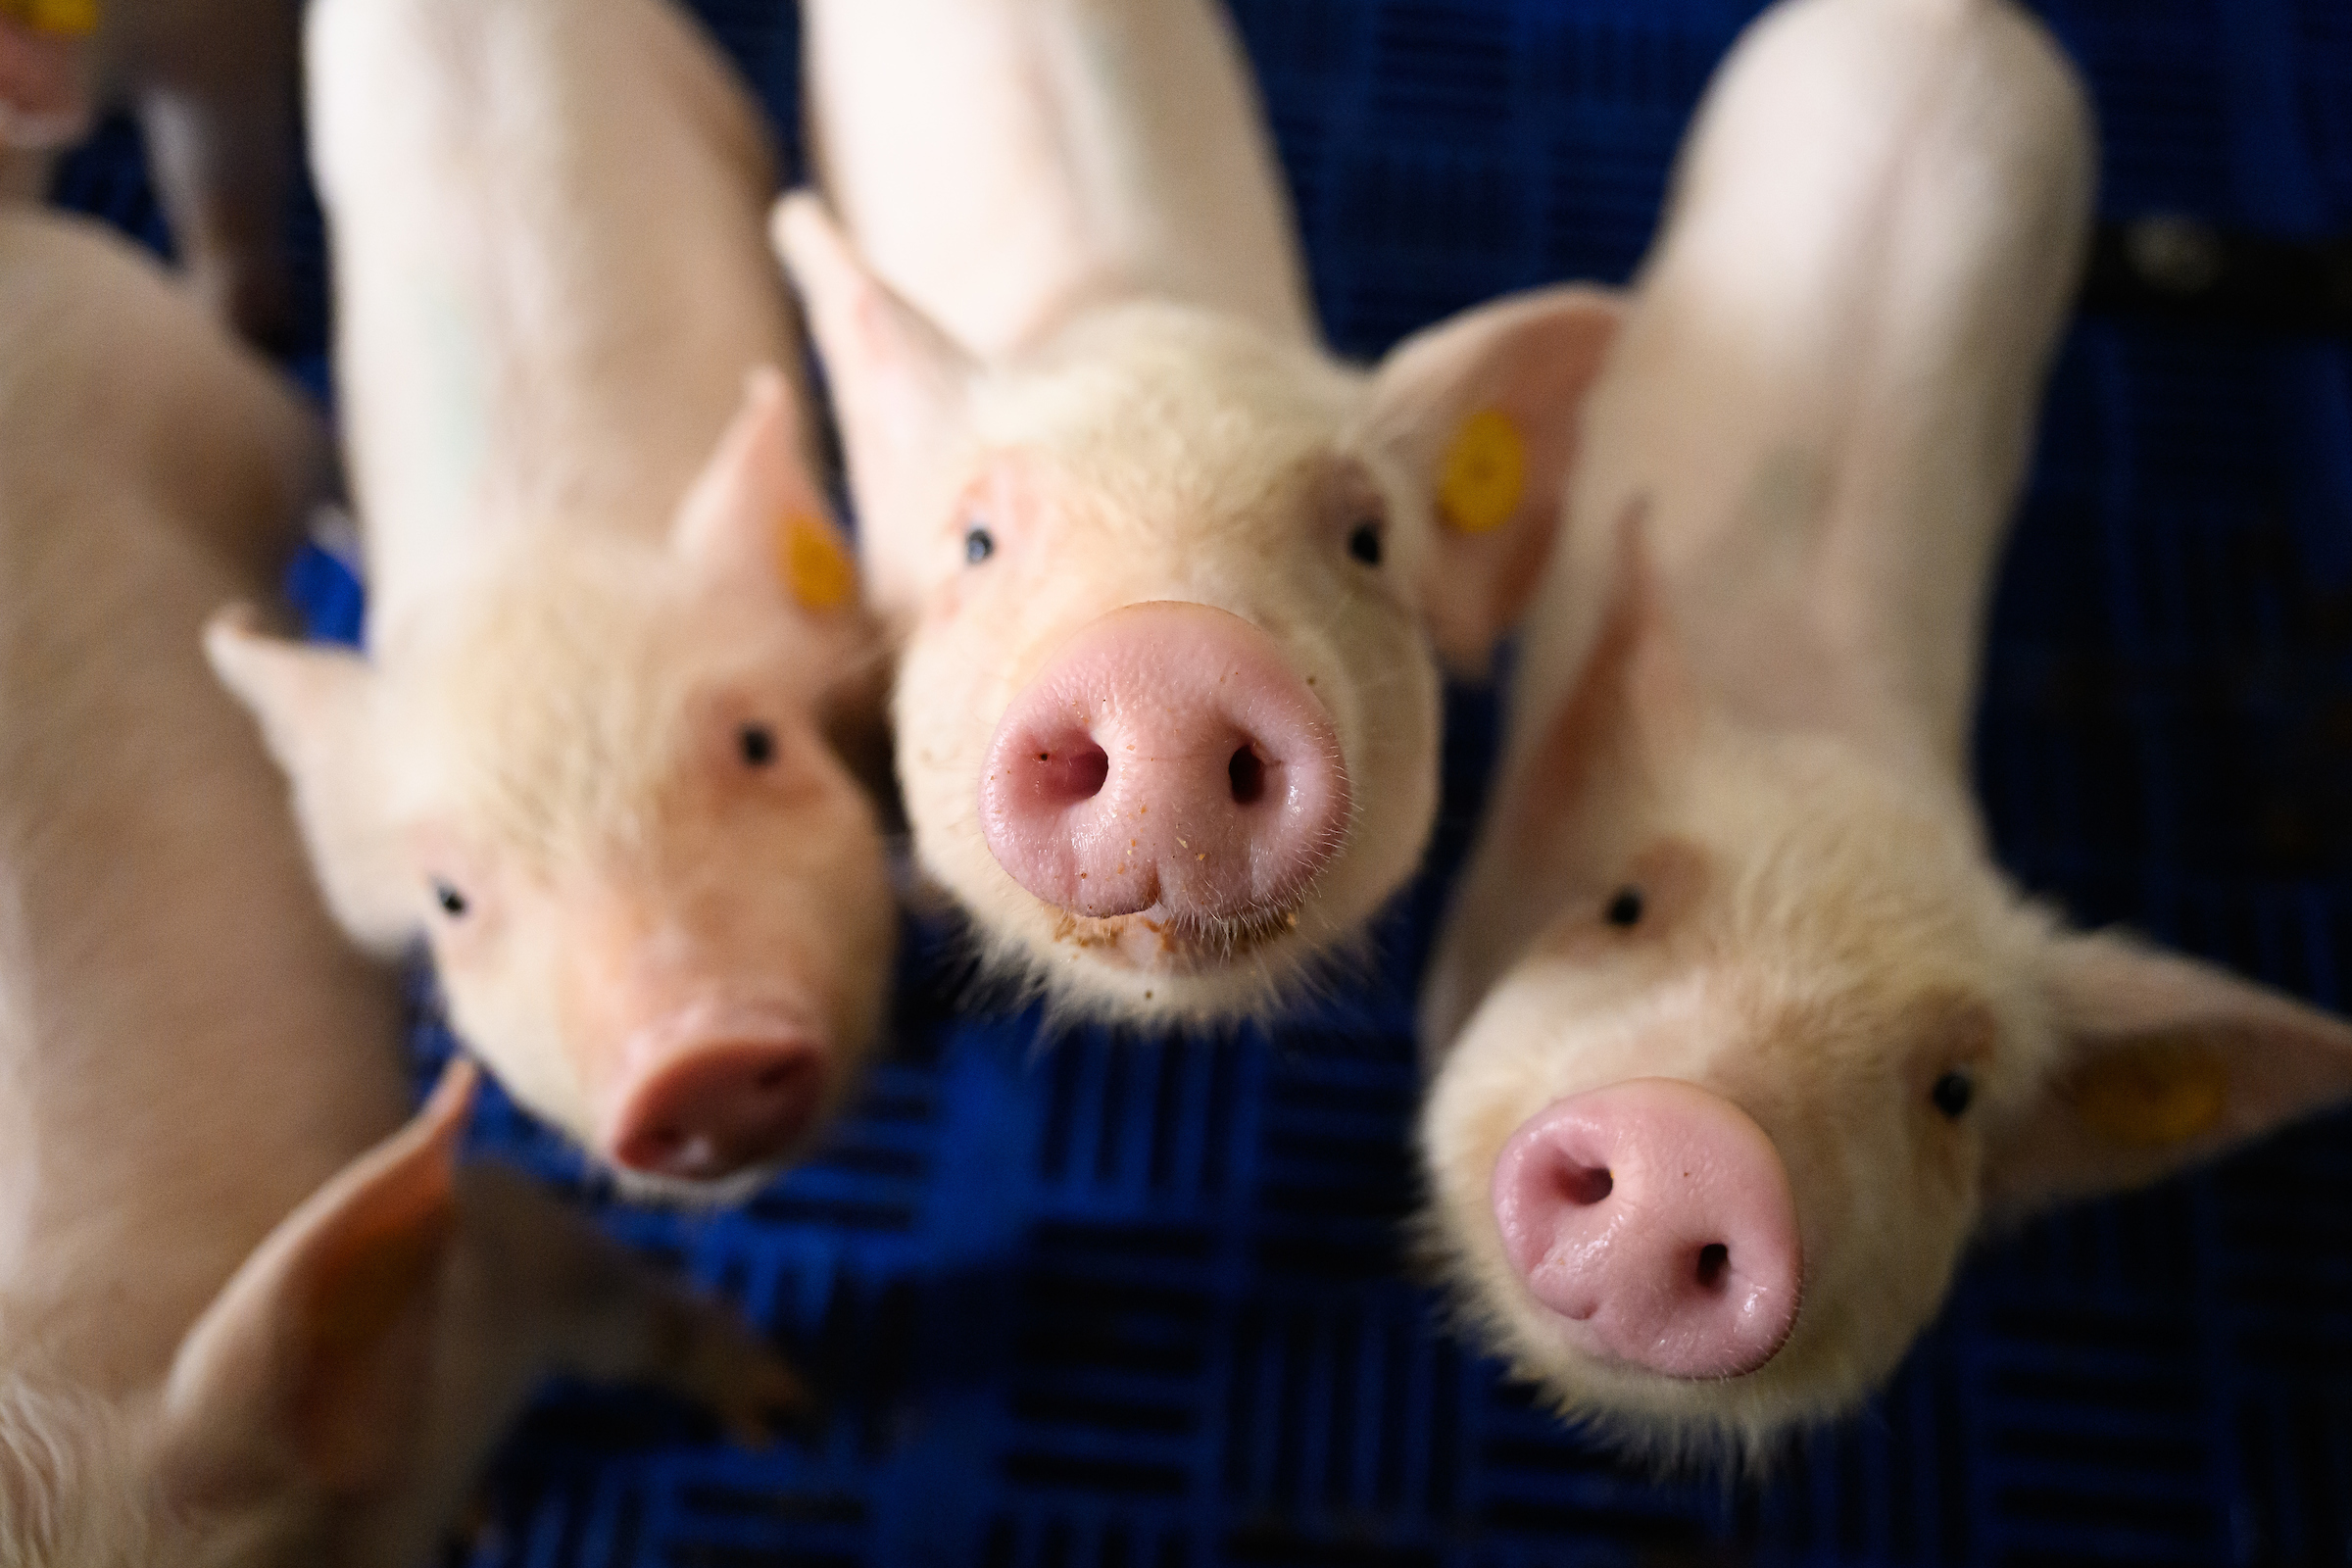 Three piglets look into the camera from below, their faces upturned.